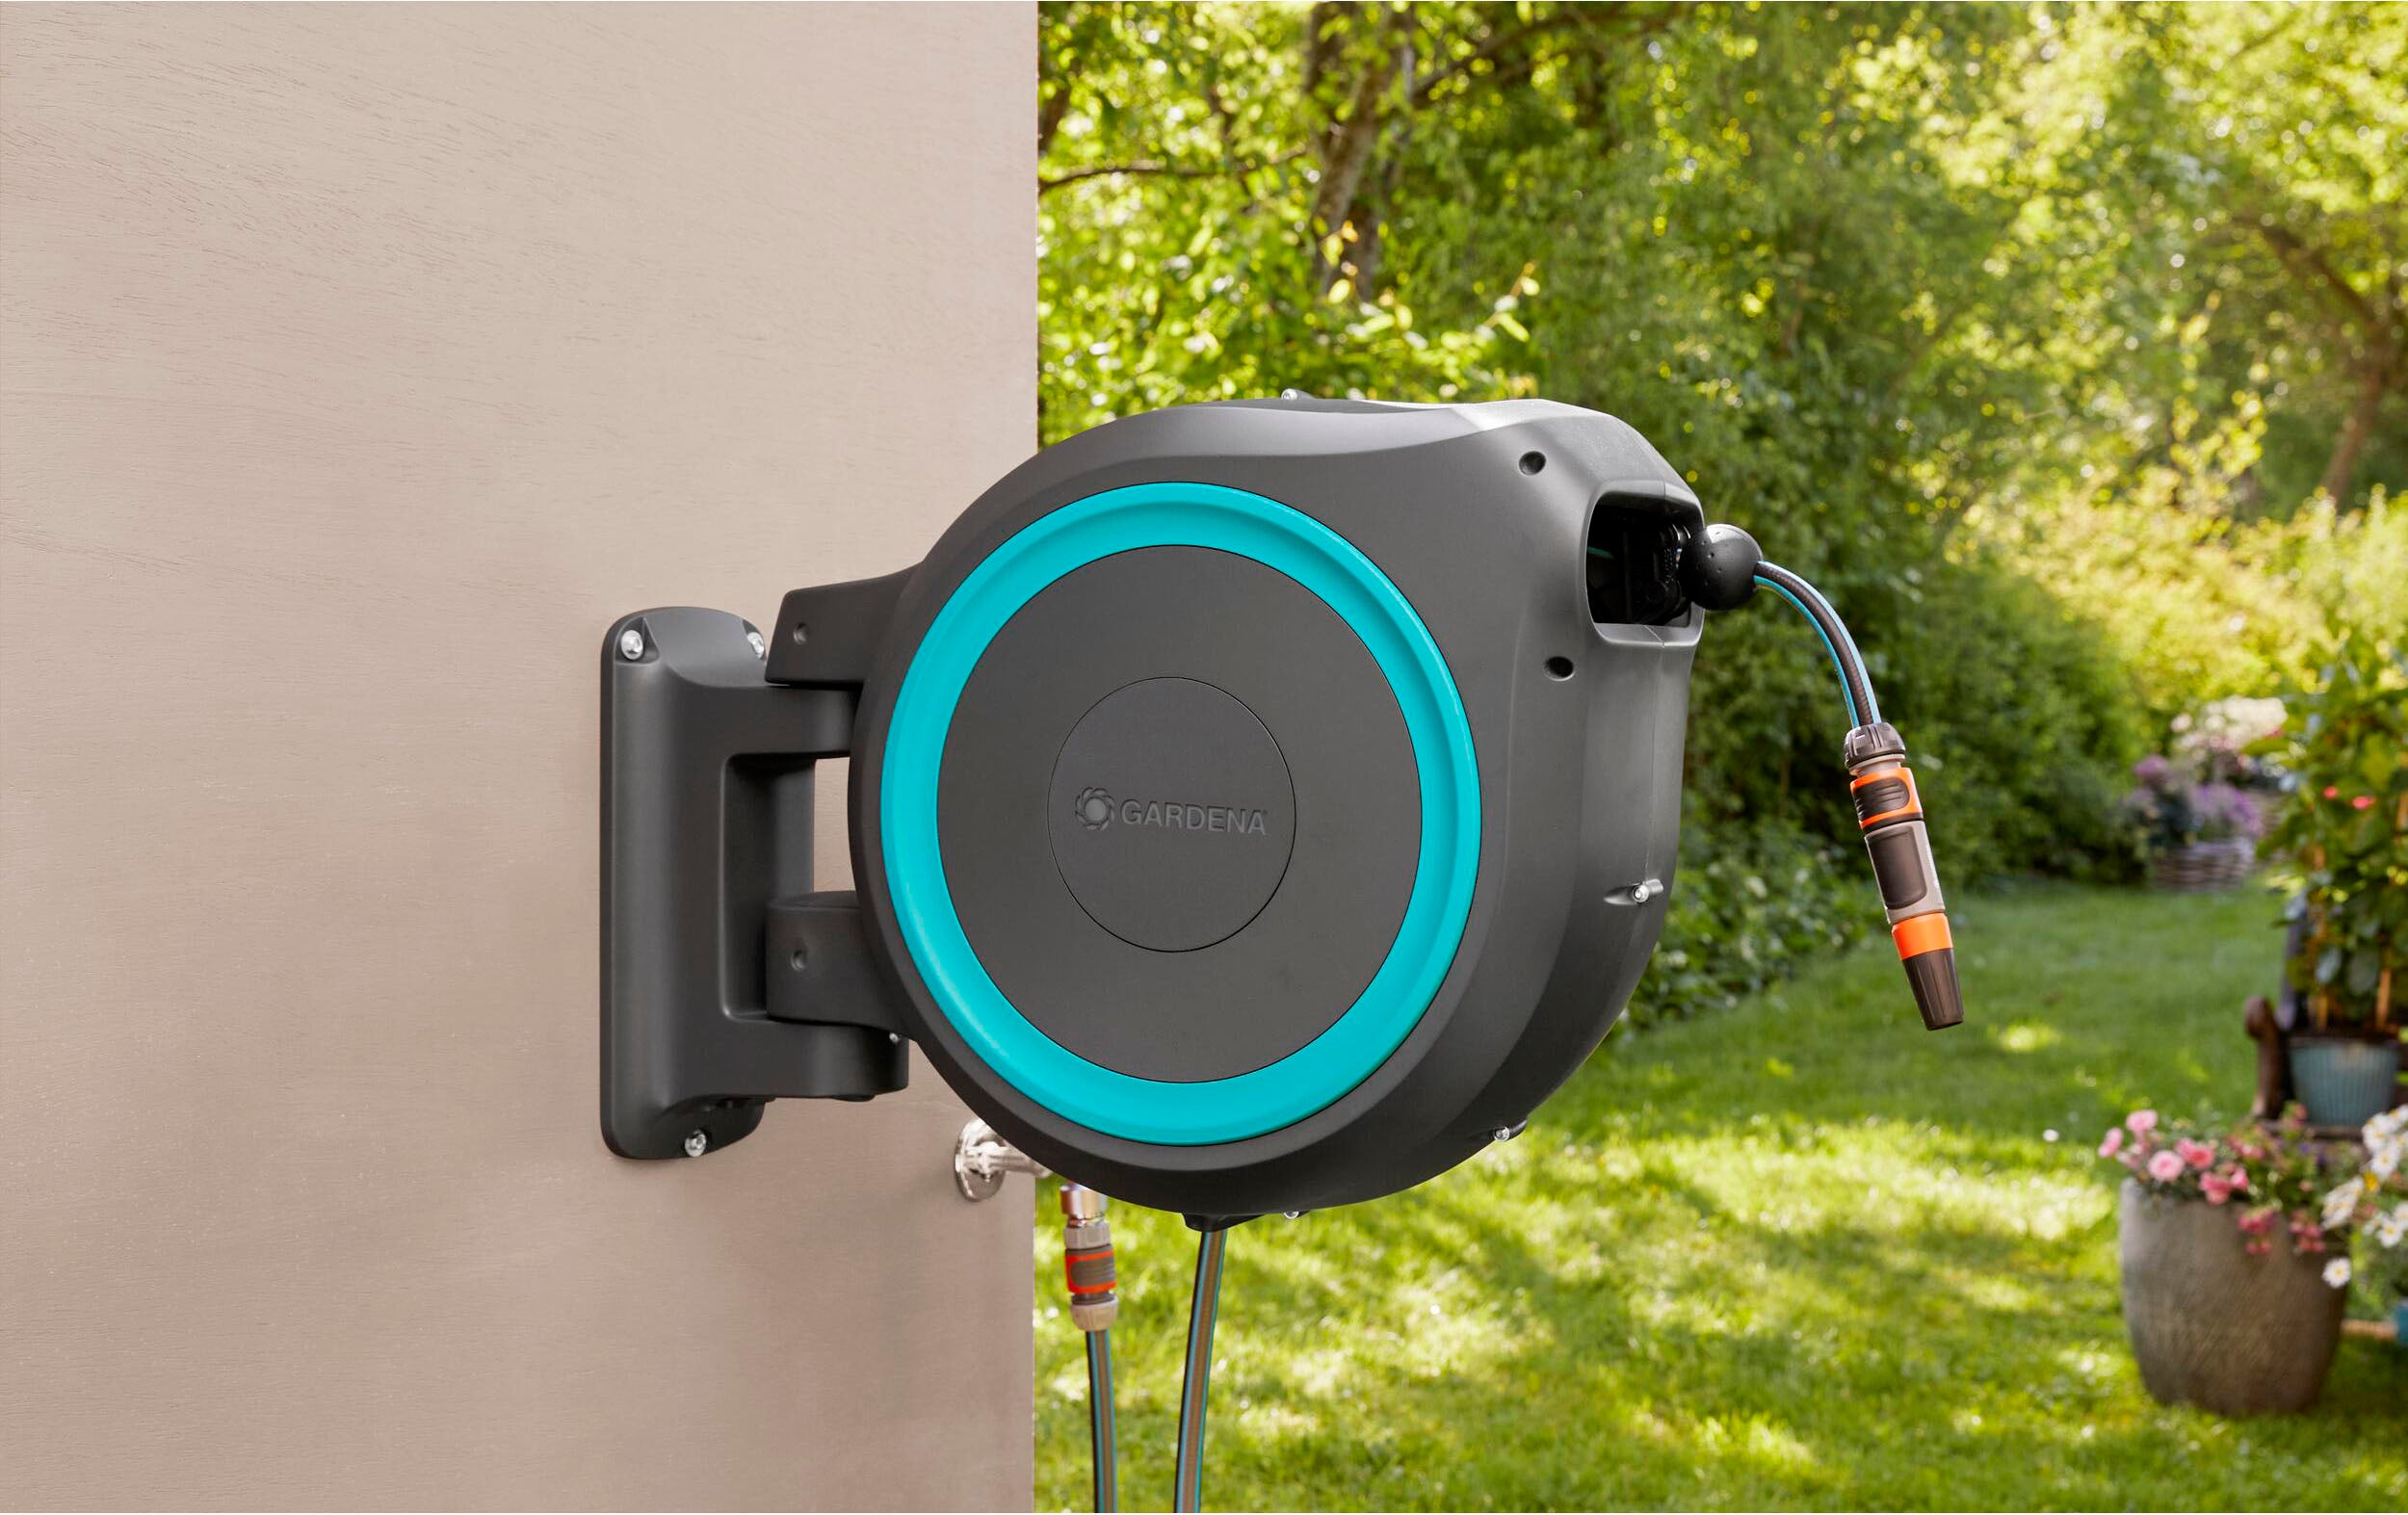 Retractable 82ft Garden Hose Reel, The First Australian Industrial-designed Garden Reel Built for The Consumer. Wall Mounted & Includes Feeder Hose.